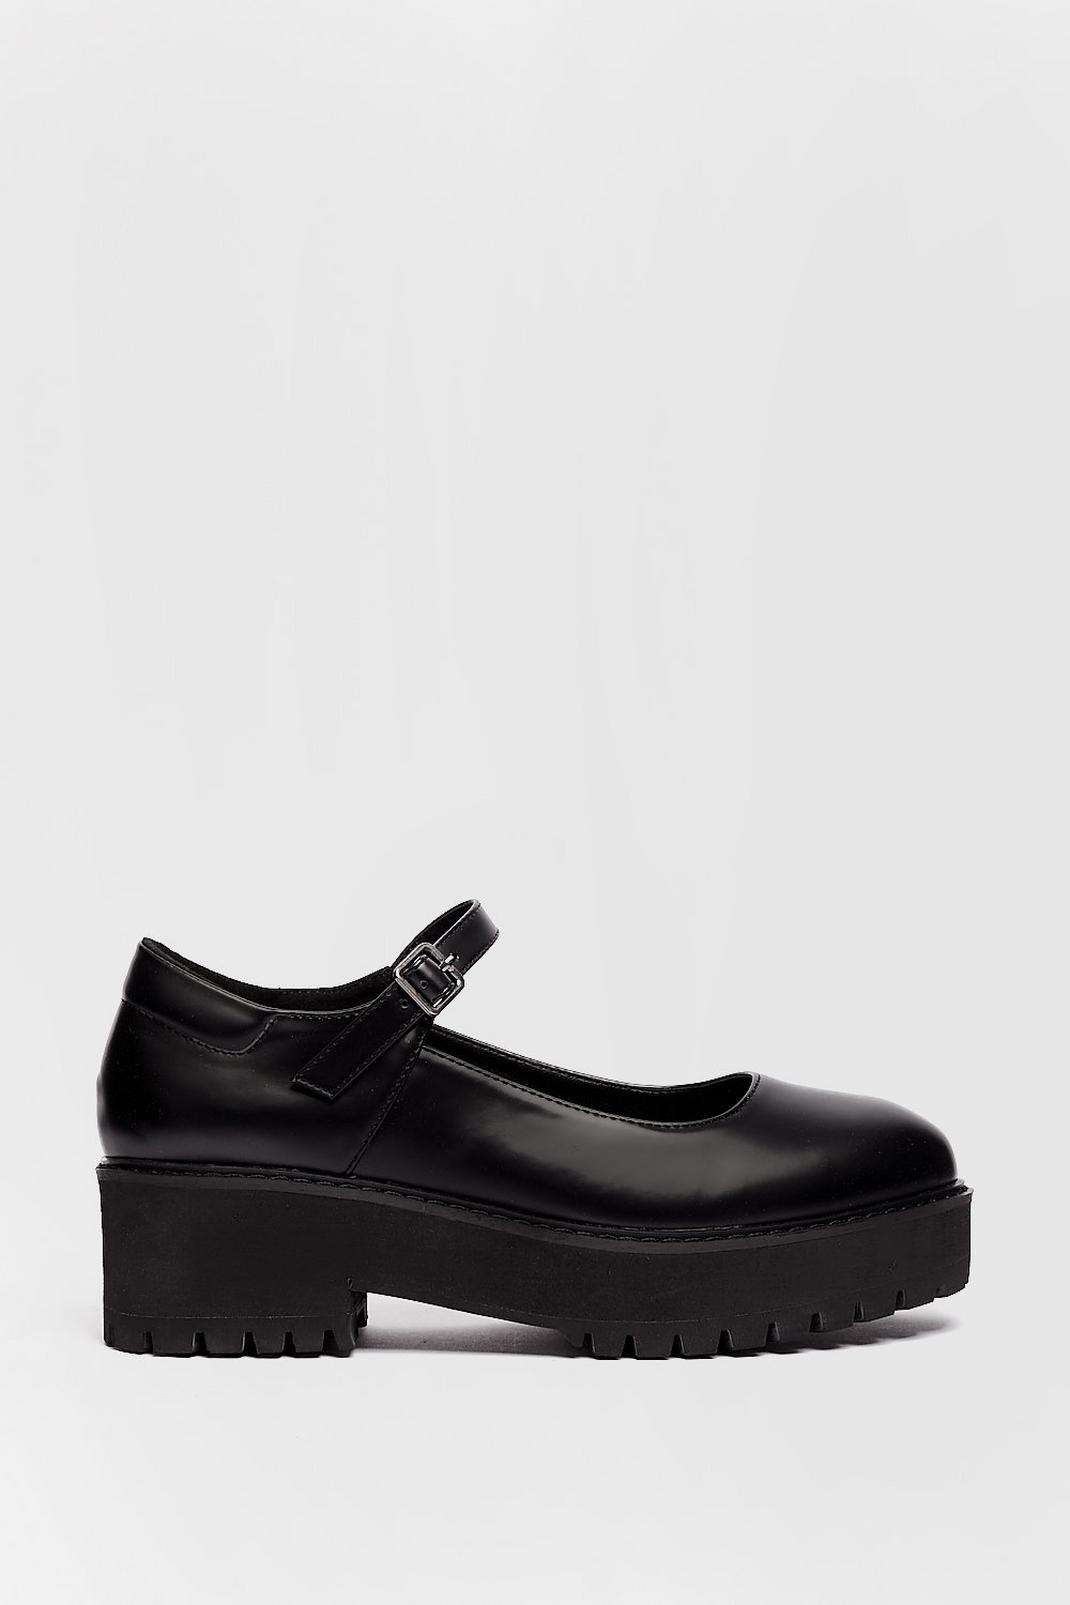 Platform Faux Leather Mary Janes | Nasty Gal